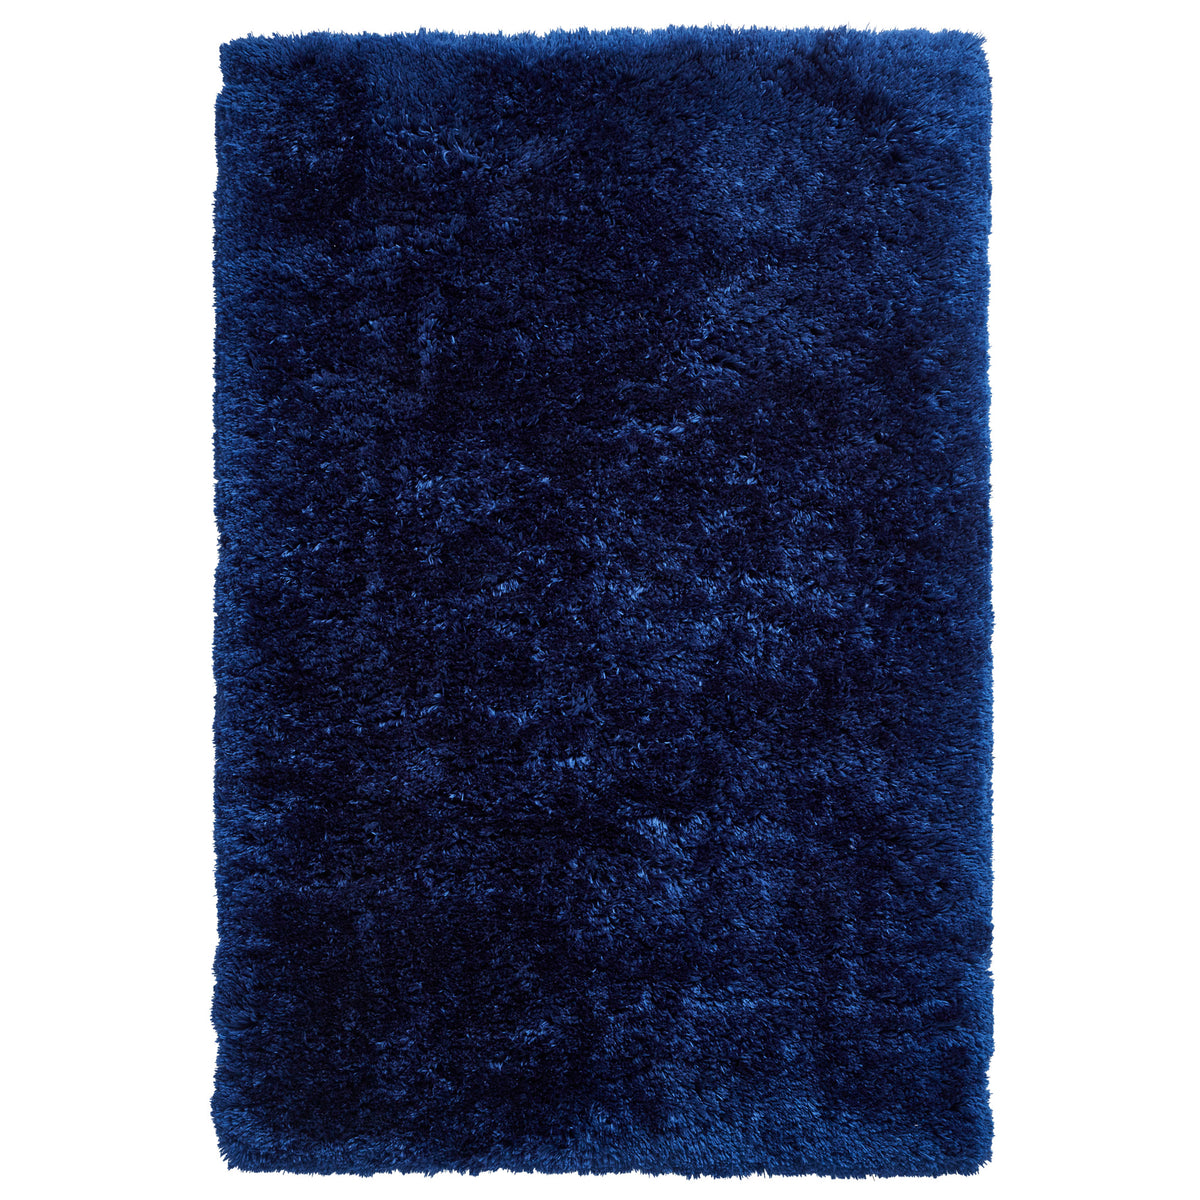 Hatton Navy Blue Hand Tufted Shaggy Rug from Roseland Furniture